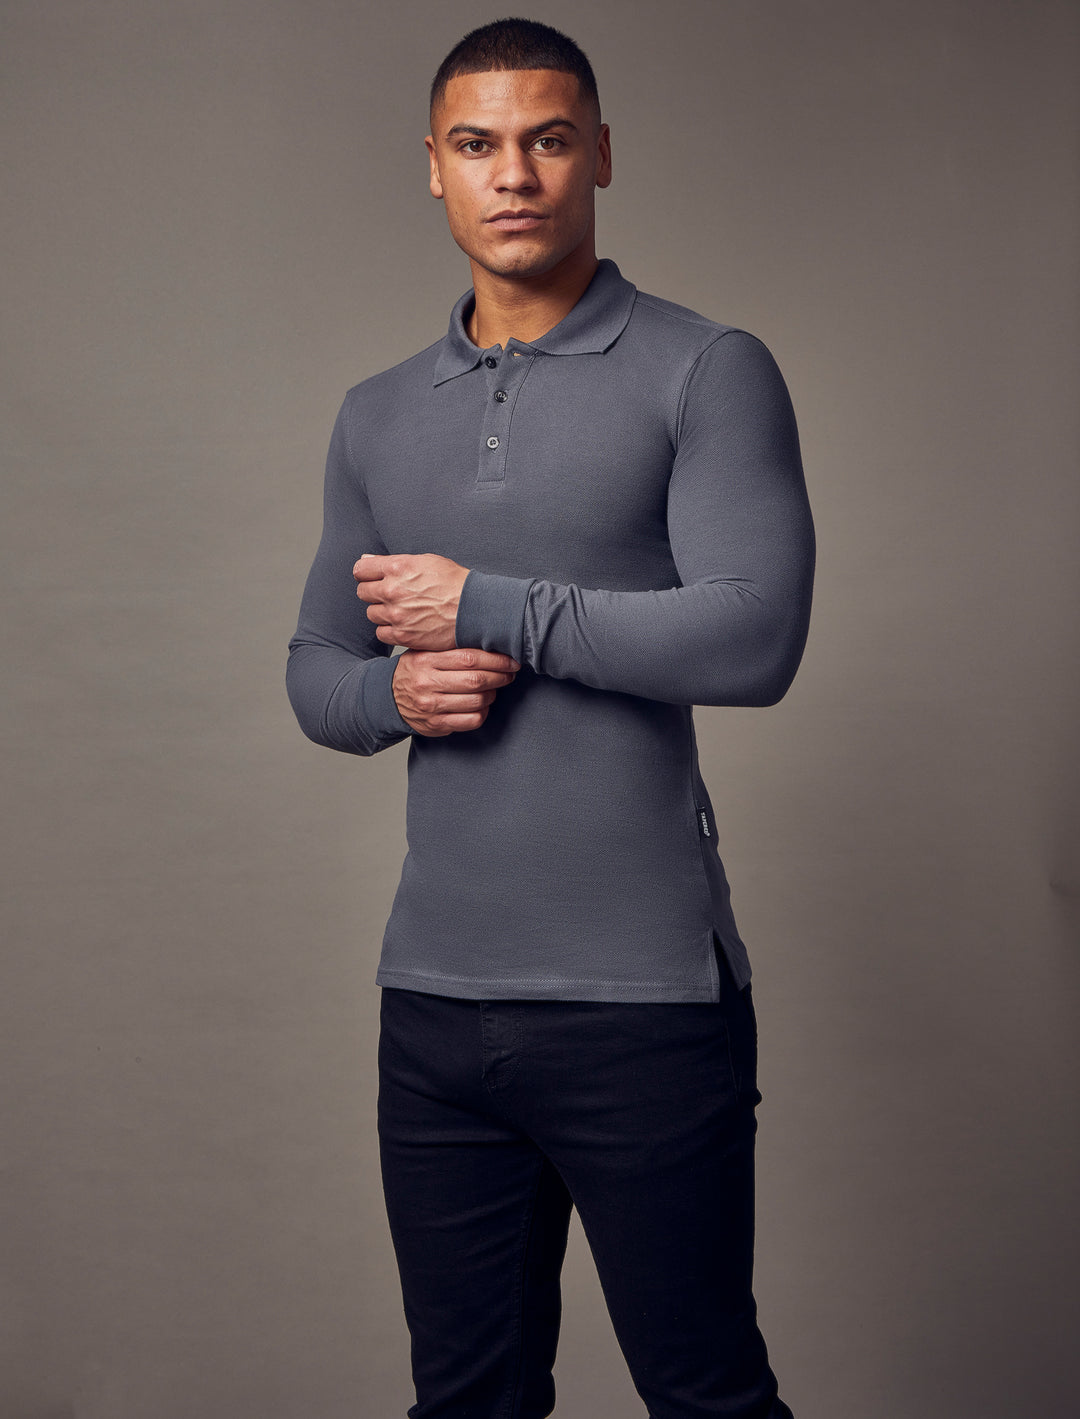  Dark grey, long-sleeve polo shirt with a tapered fit from Tapered Menswear, featuring a muscle-fit design to create a sleek and comfortable silhouette.